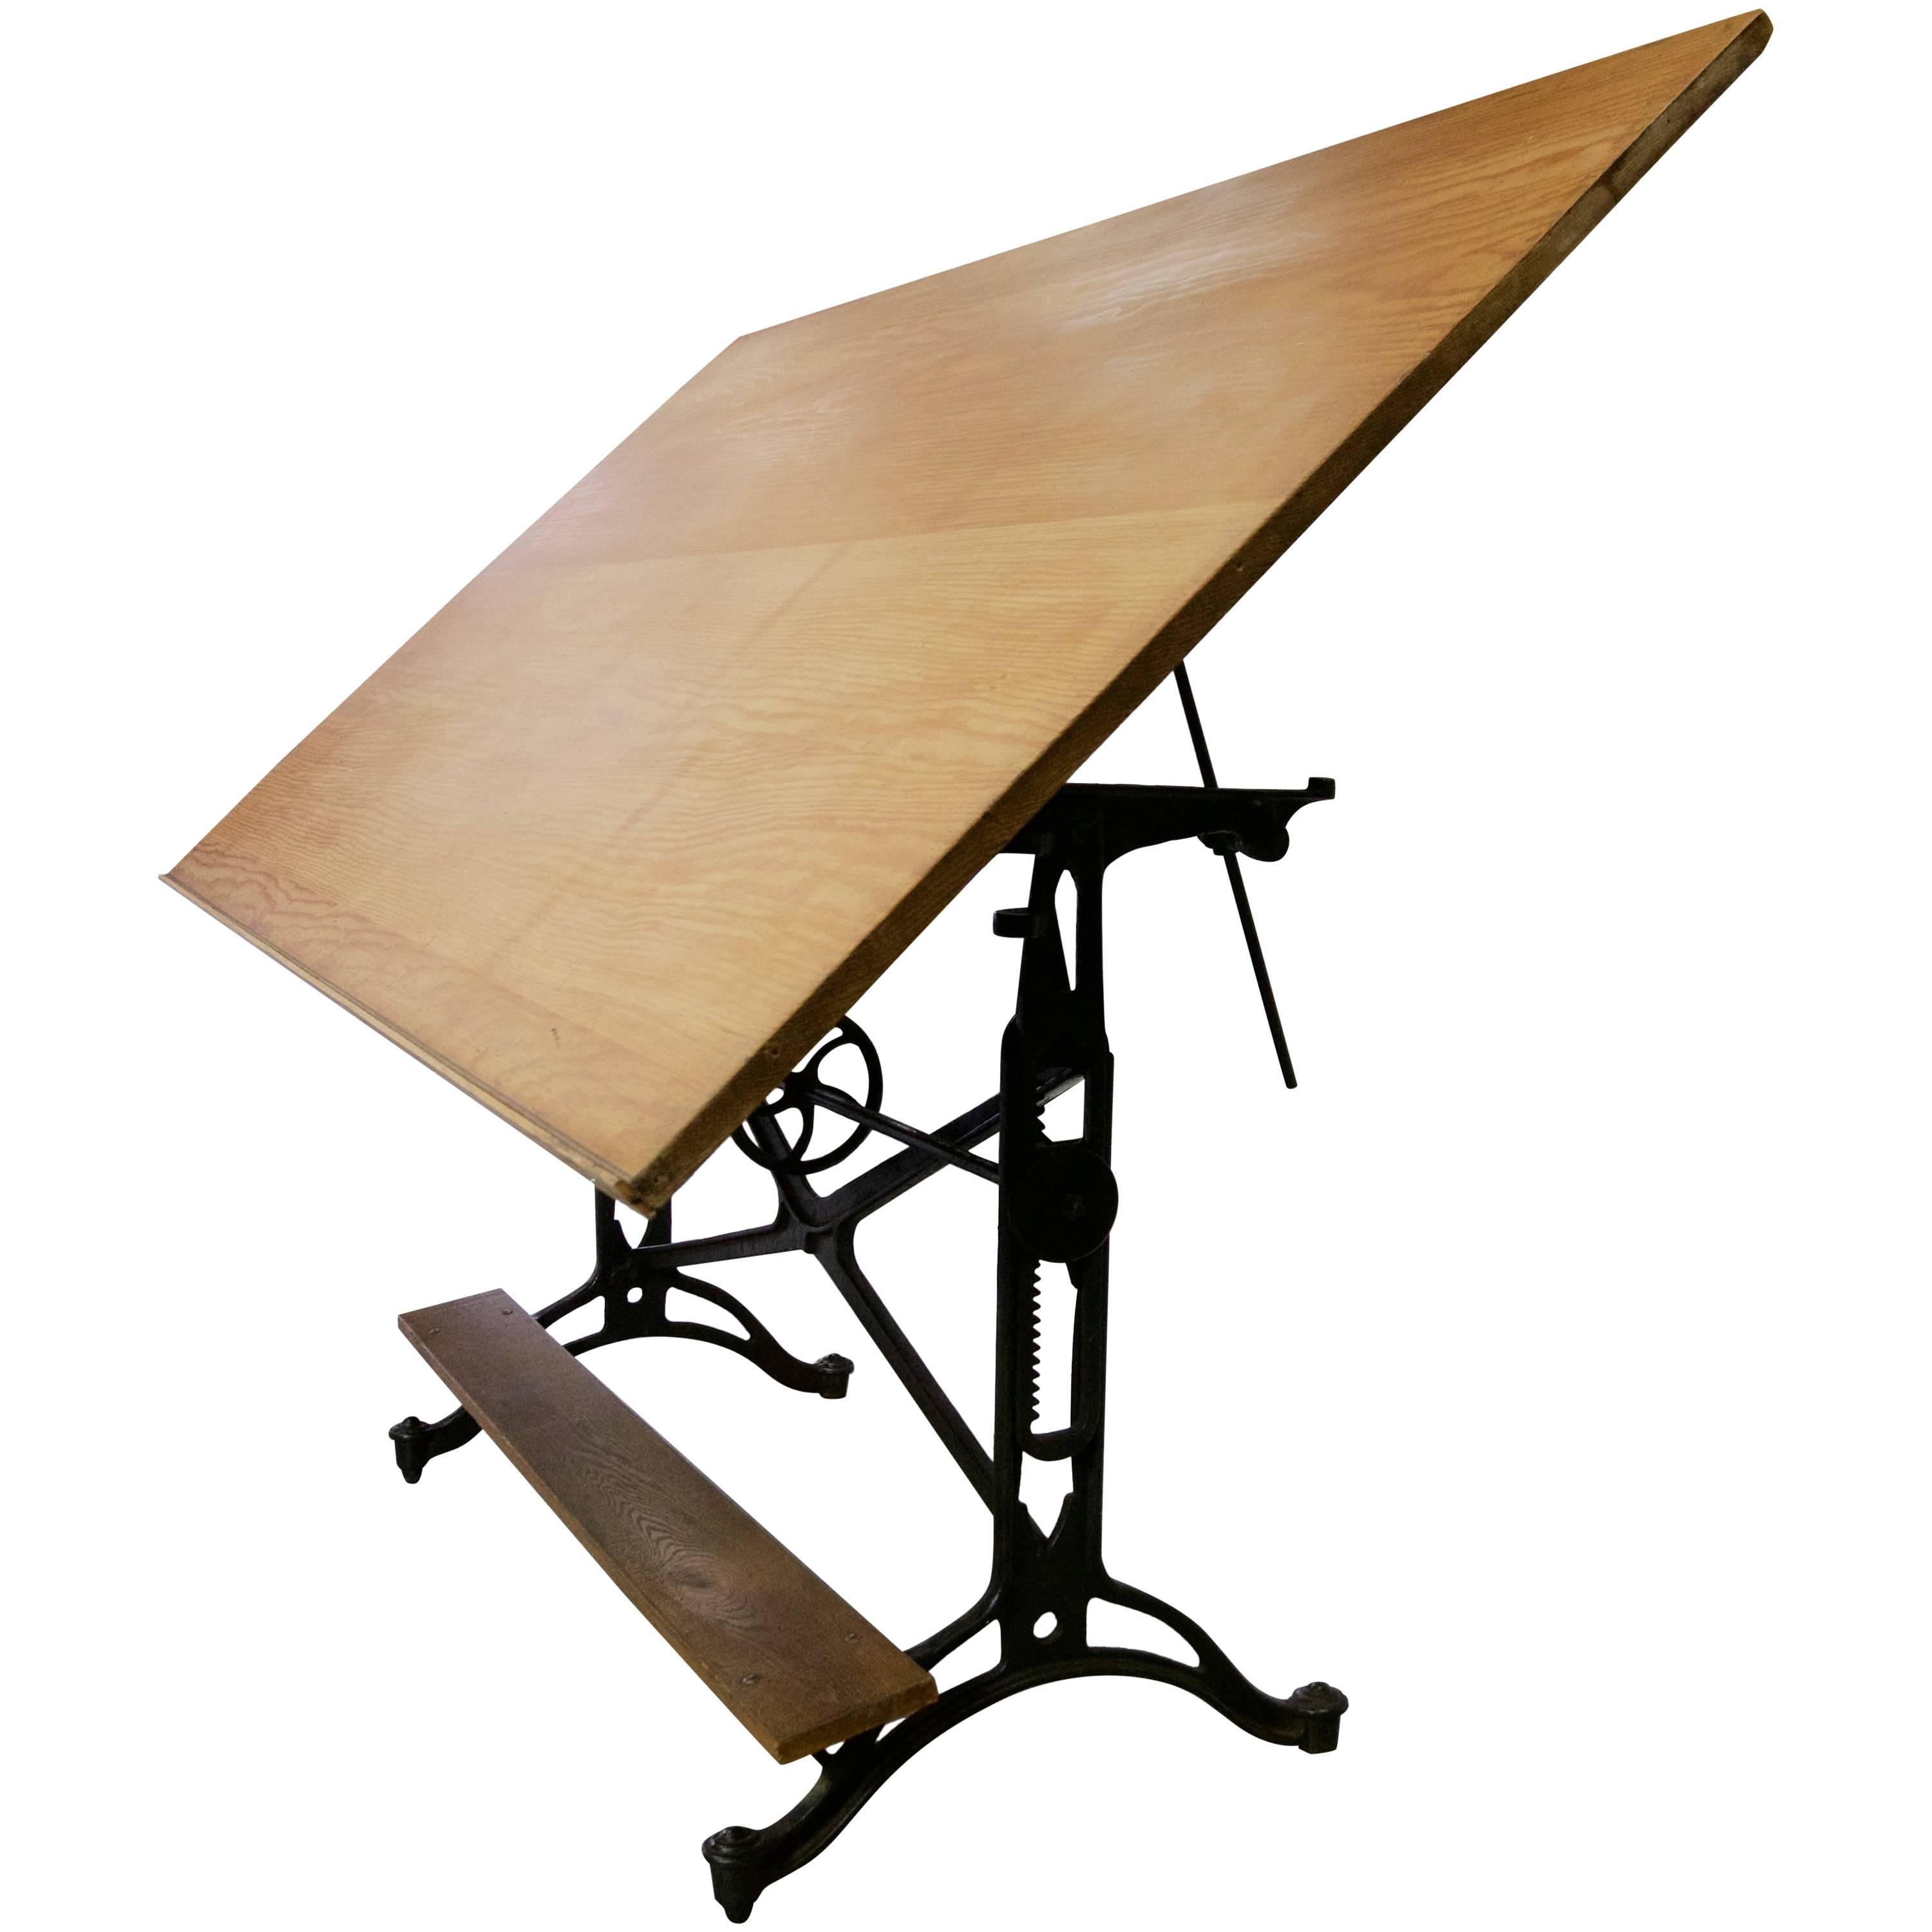 1940 Cast Iron Drafting Table with Extra Large Surface For Sale